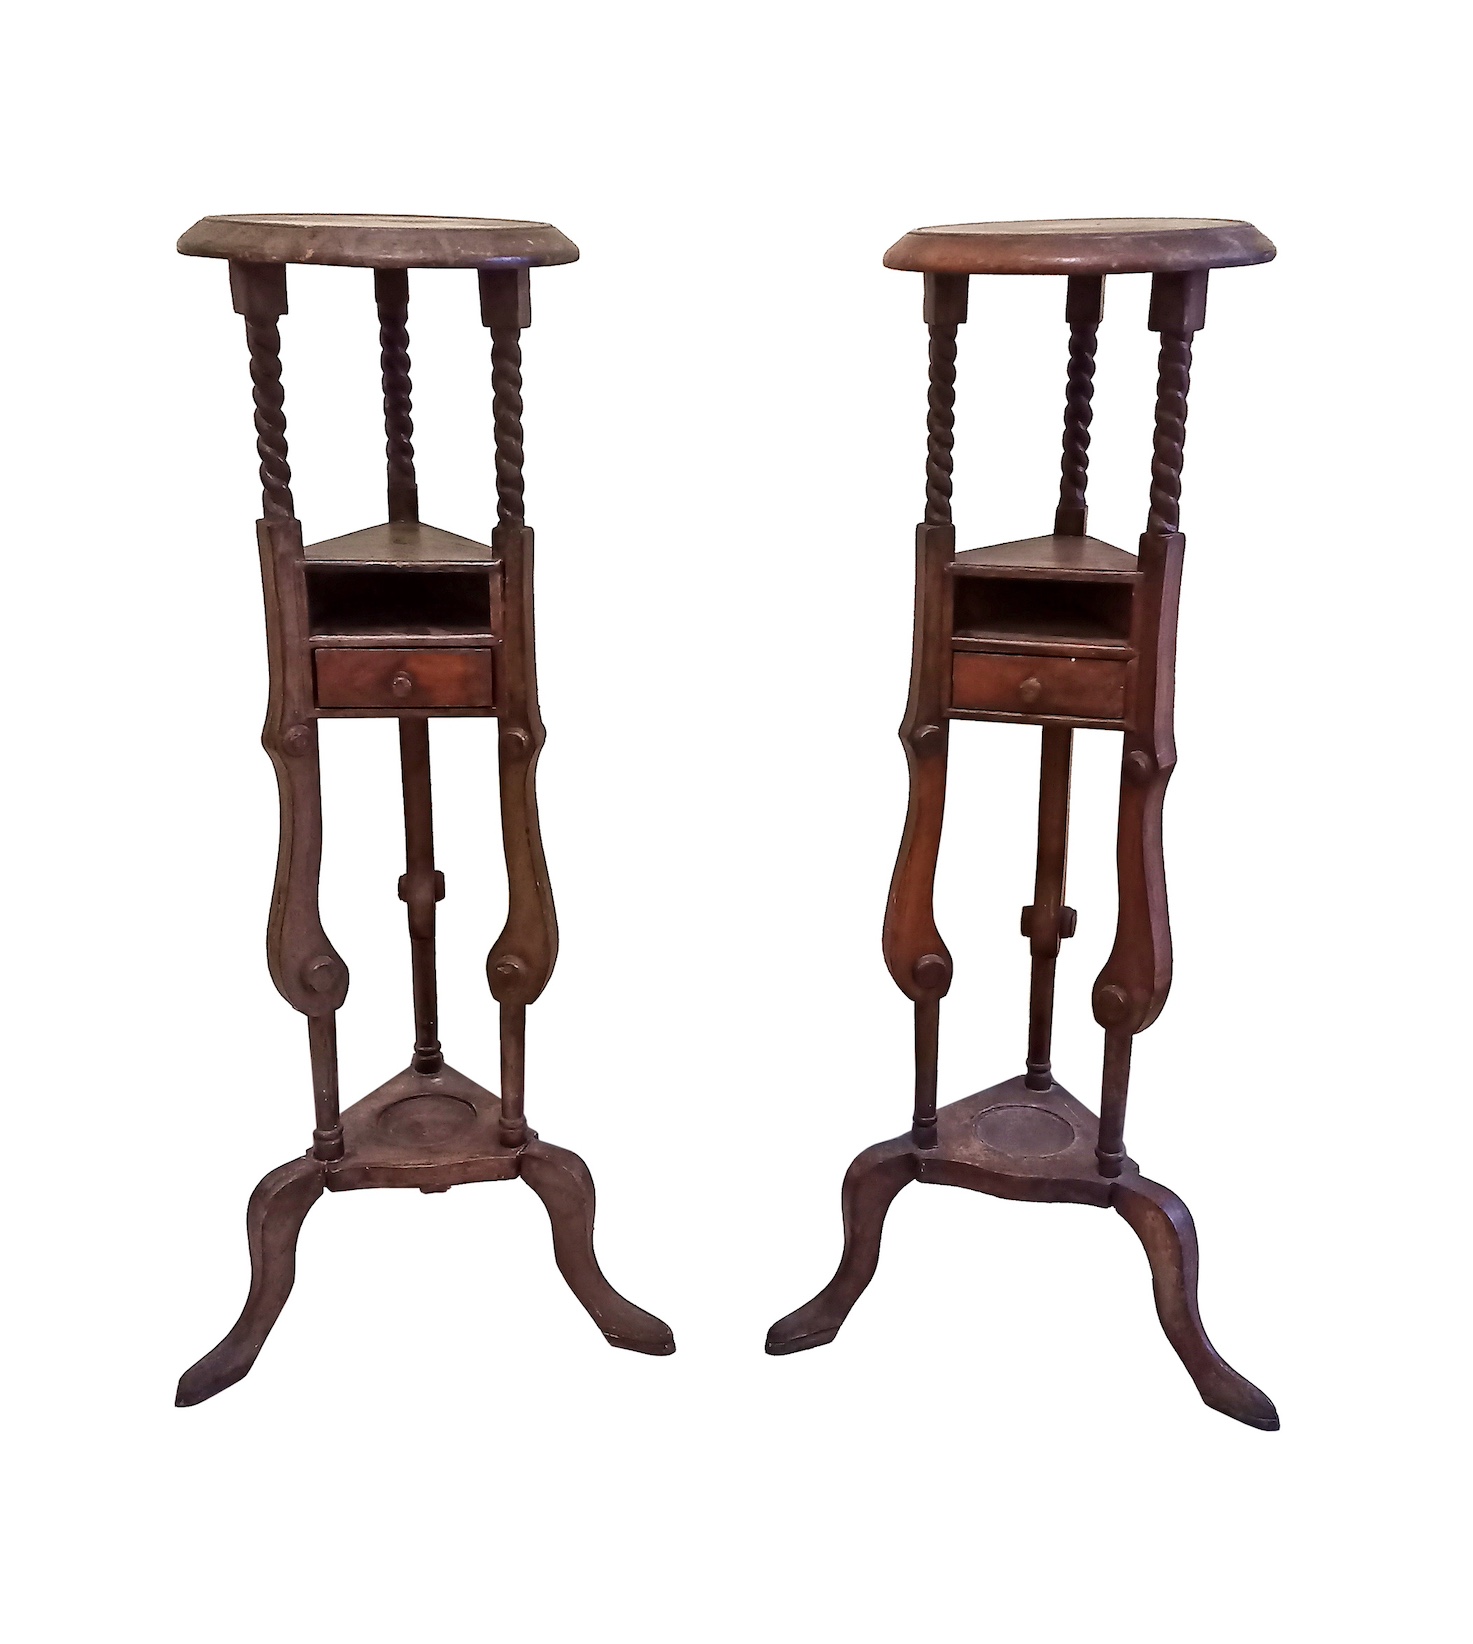 A pair of wooden pot stand with drawer